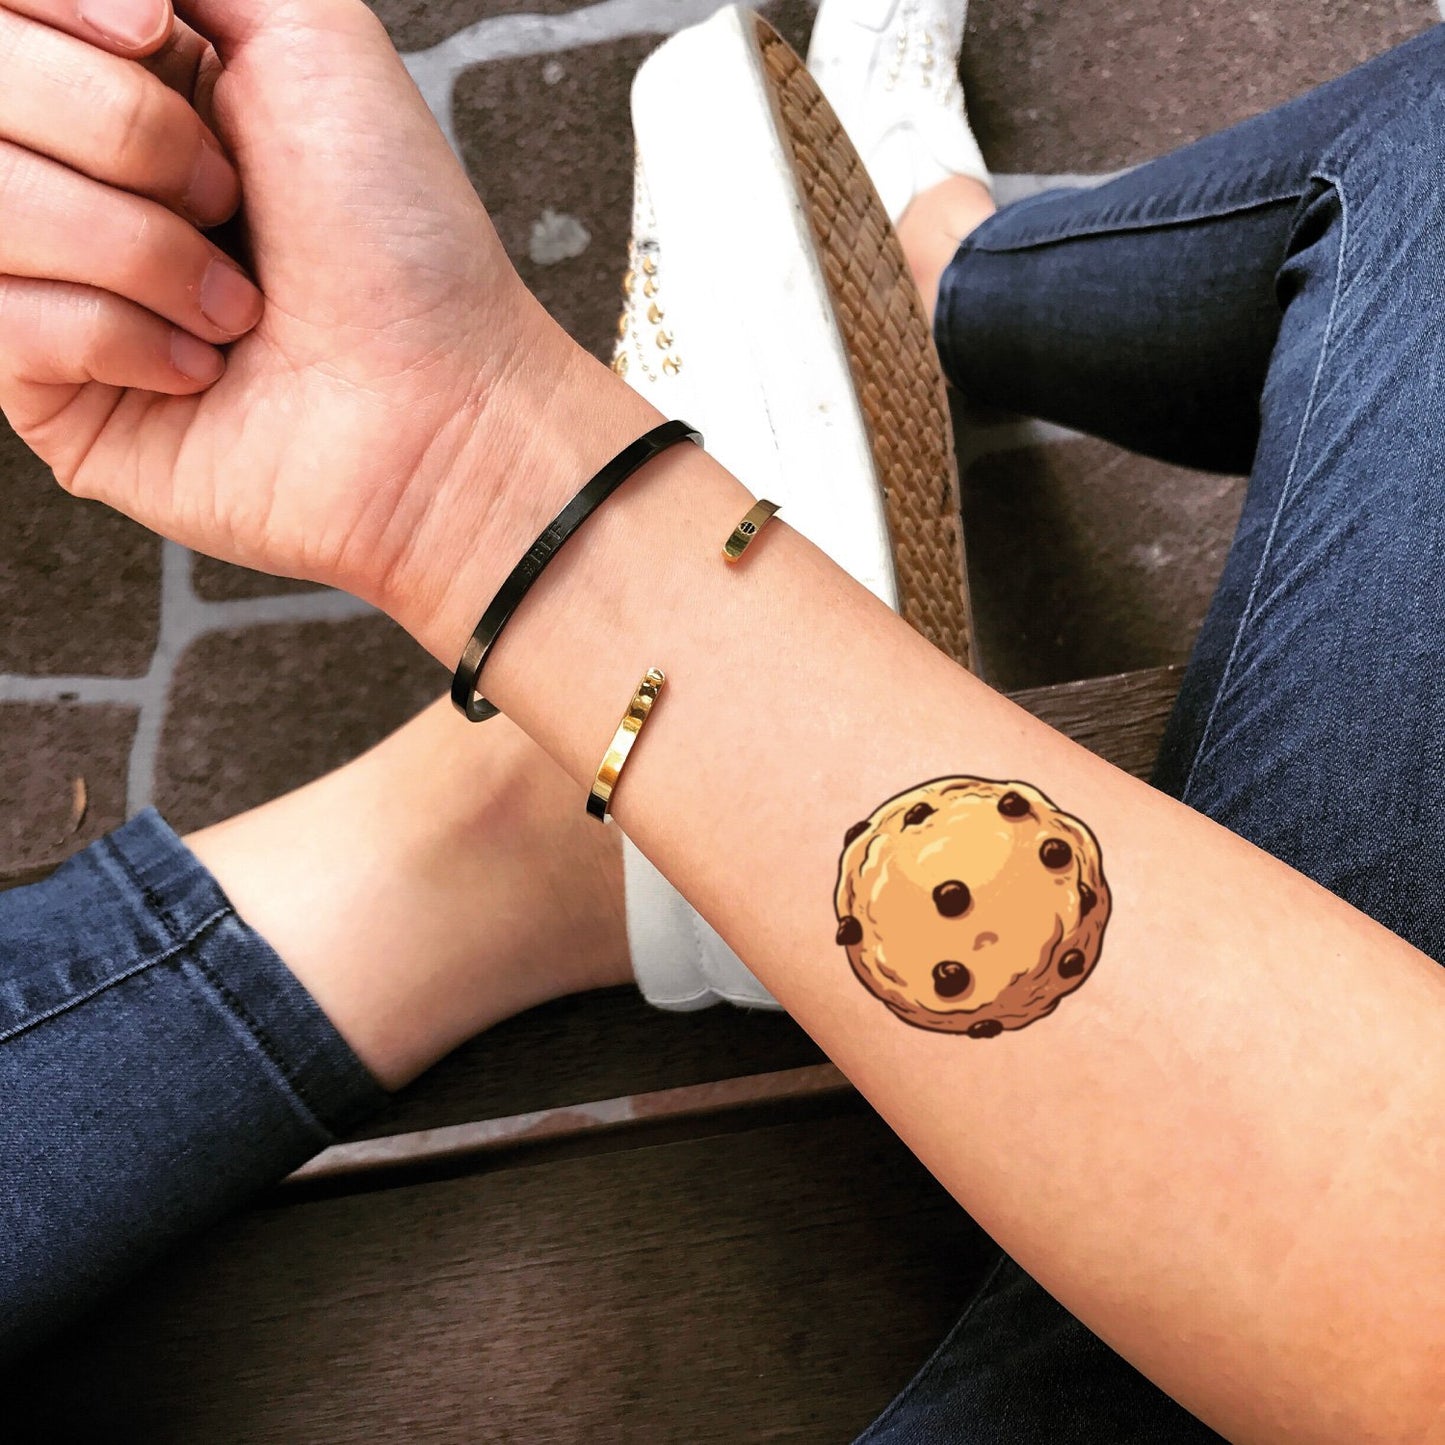 fake small cookie biscuit food color temporary tattoo sticker design idea on forearm